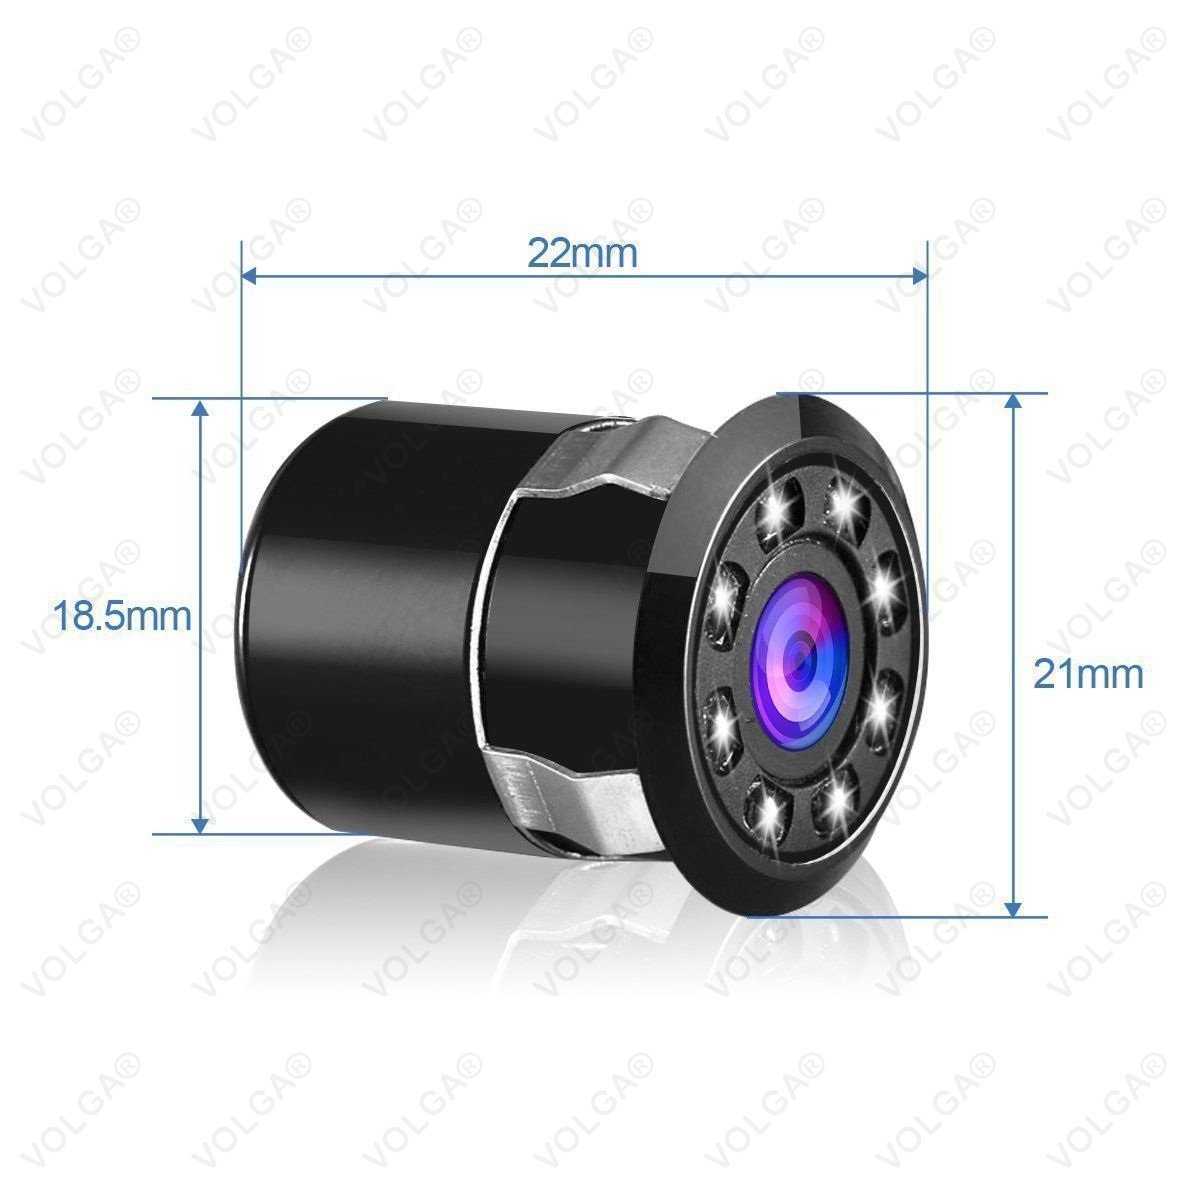 Car Rear View Reverse Parking Camera with 8 LED Waterproof 170 Degree Wide Angle Night Vision for All Cars